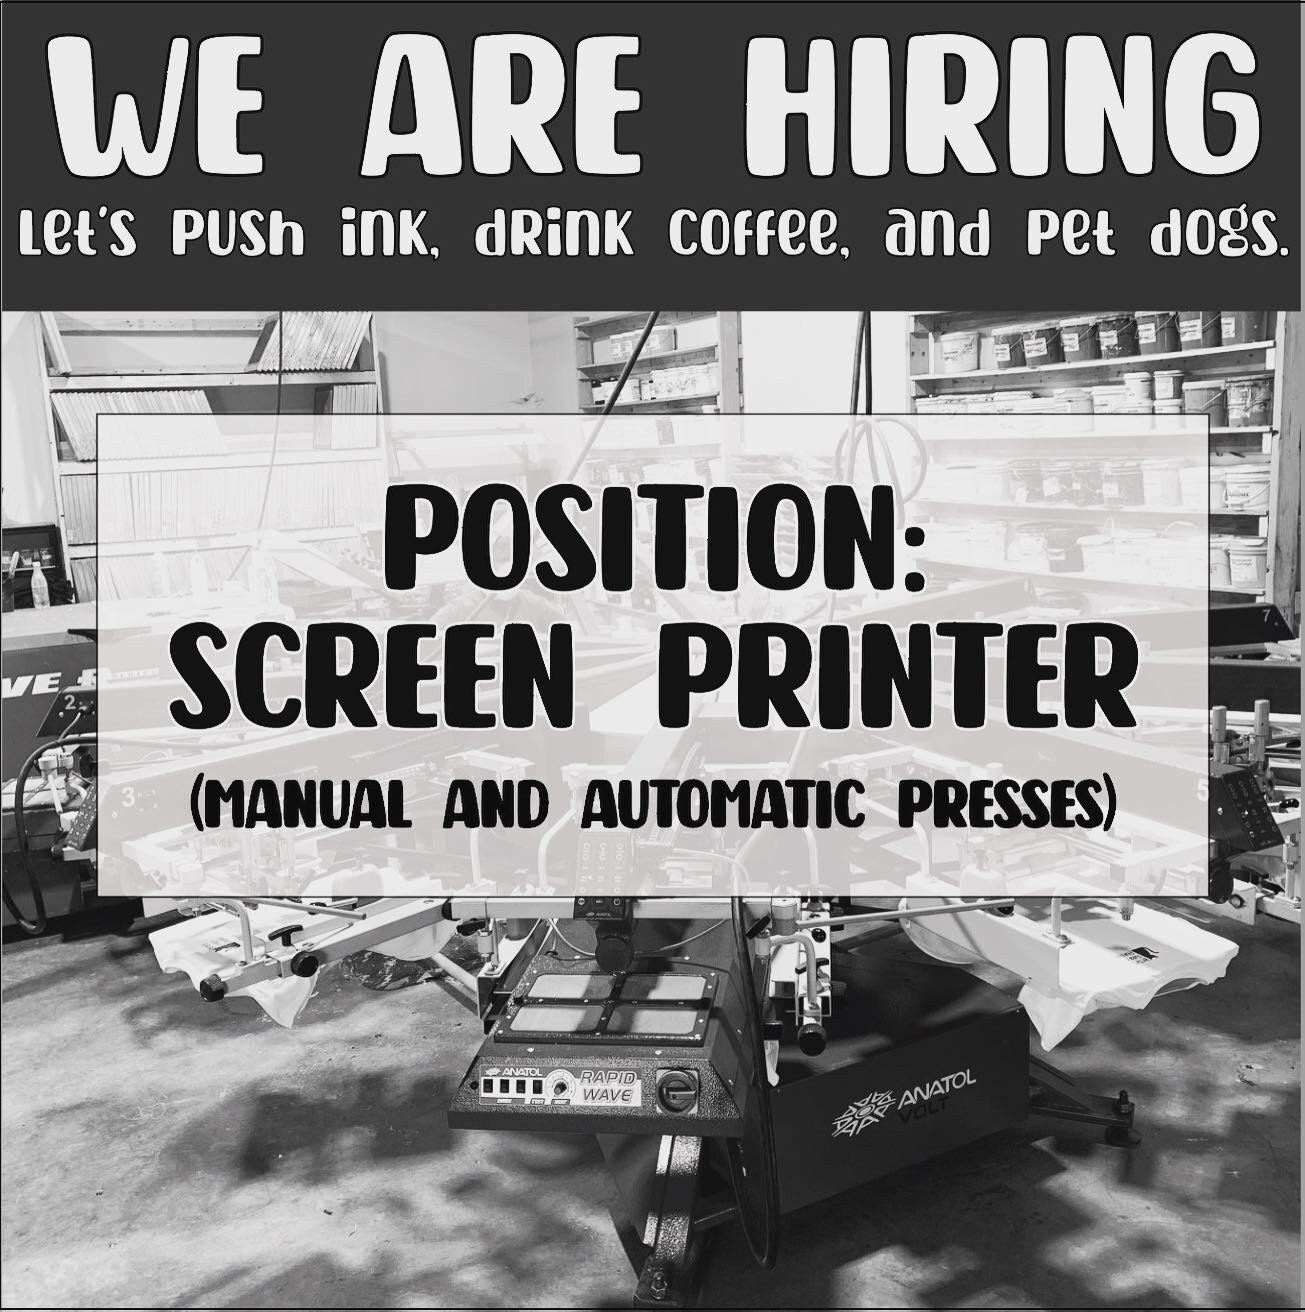 We are looking to add a member to our team! This is a full time position in our print room on a multi colored manual or automatic print press! Message us if you&rsquo;d like to start a conversation. #teamblackbird